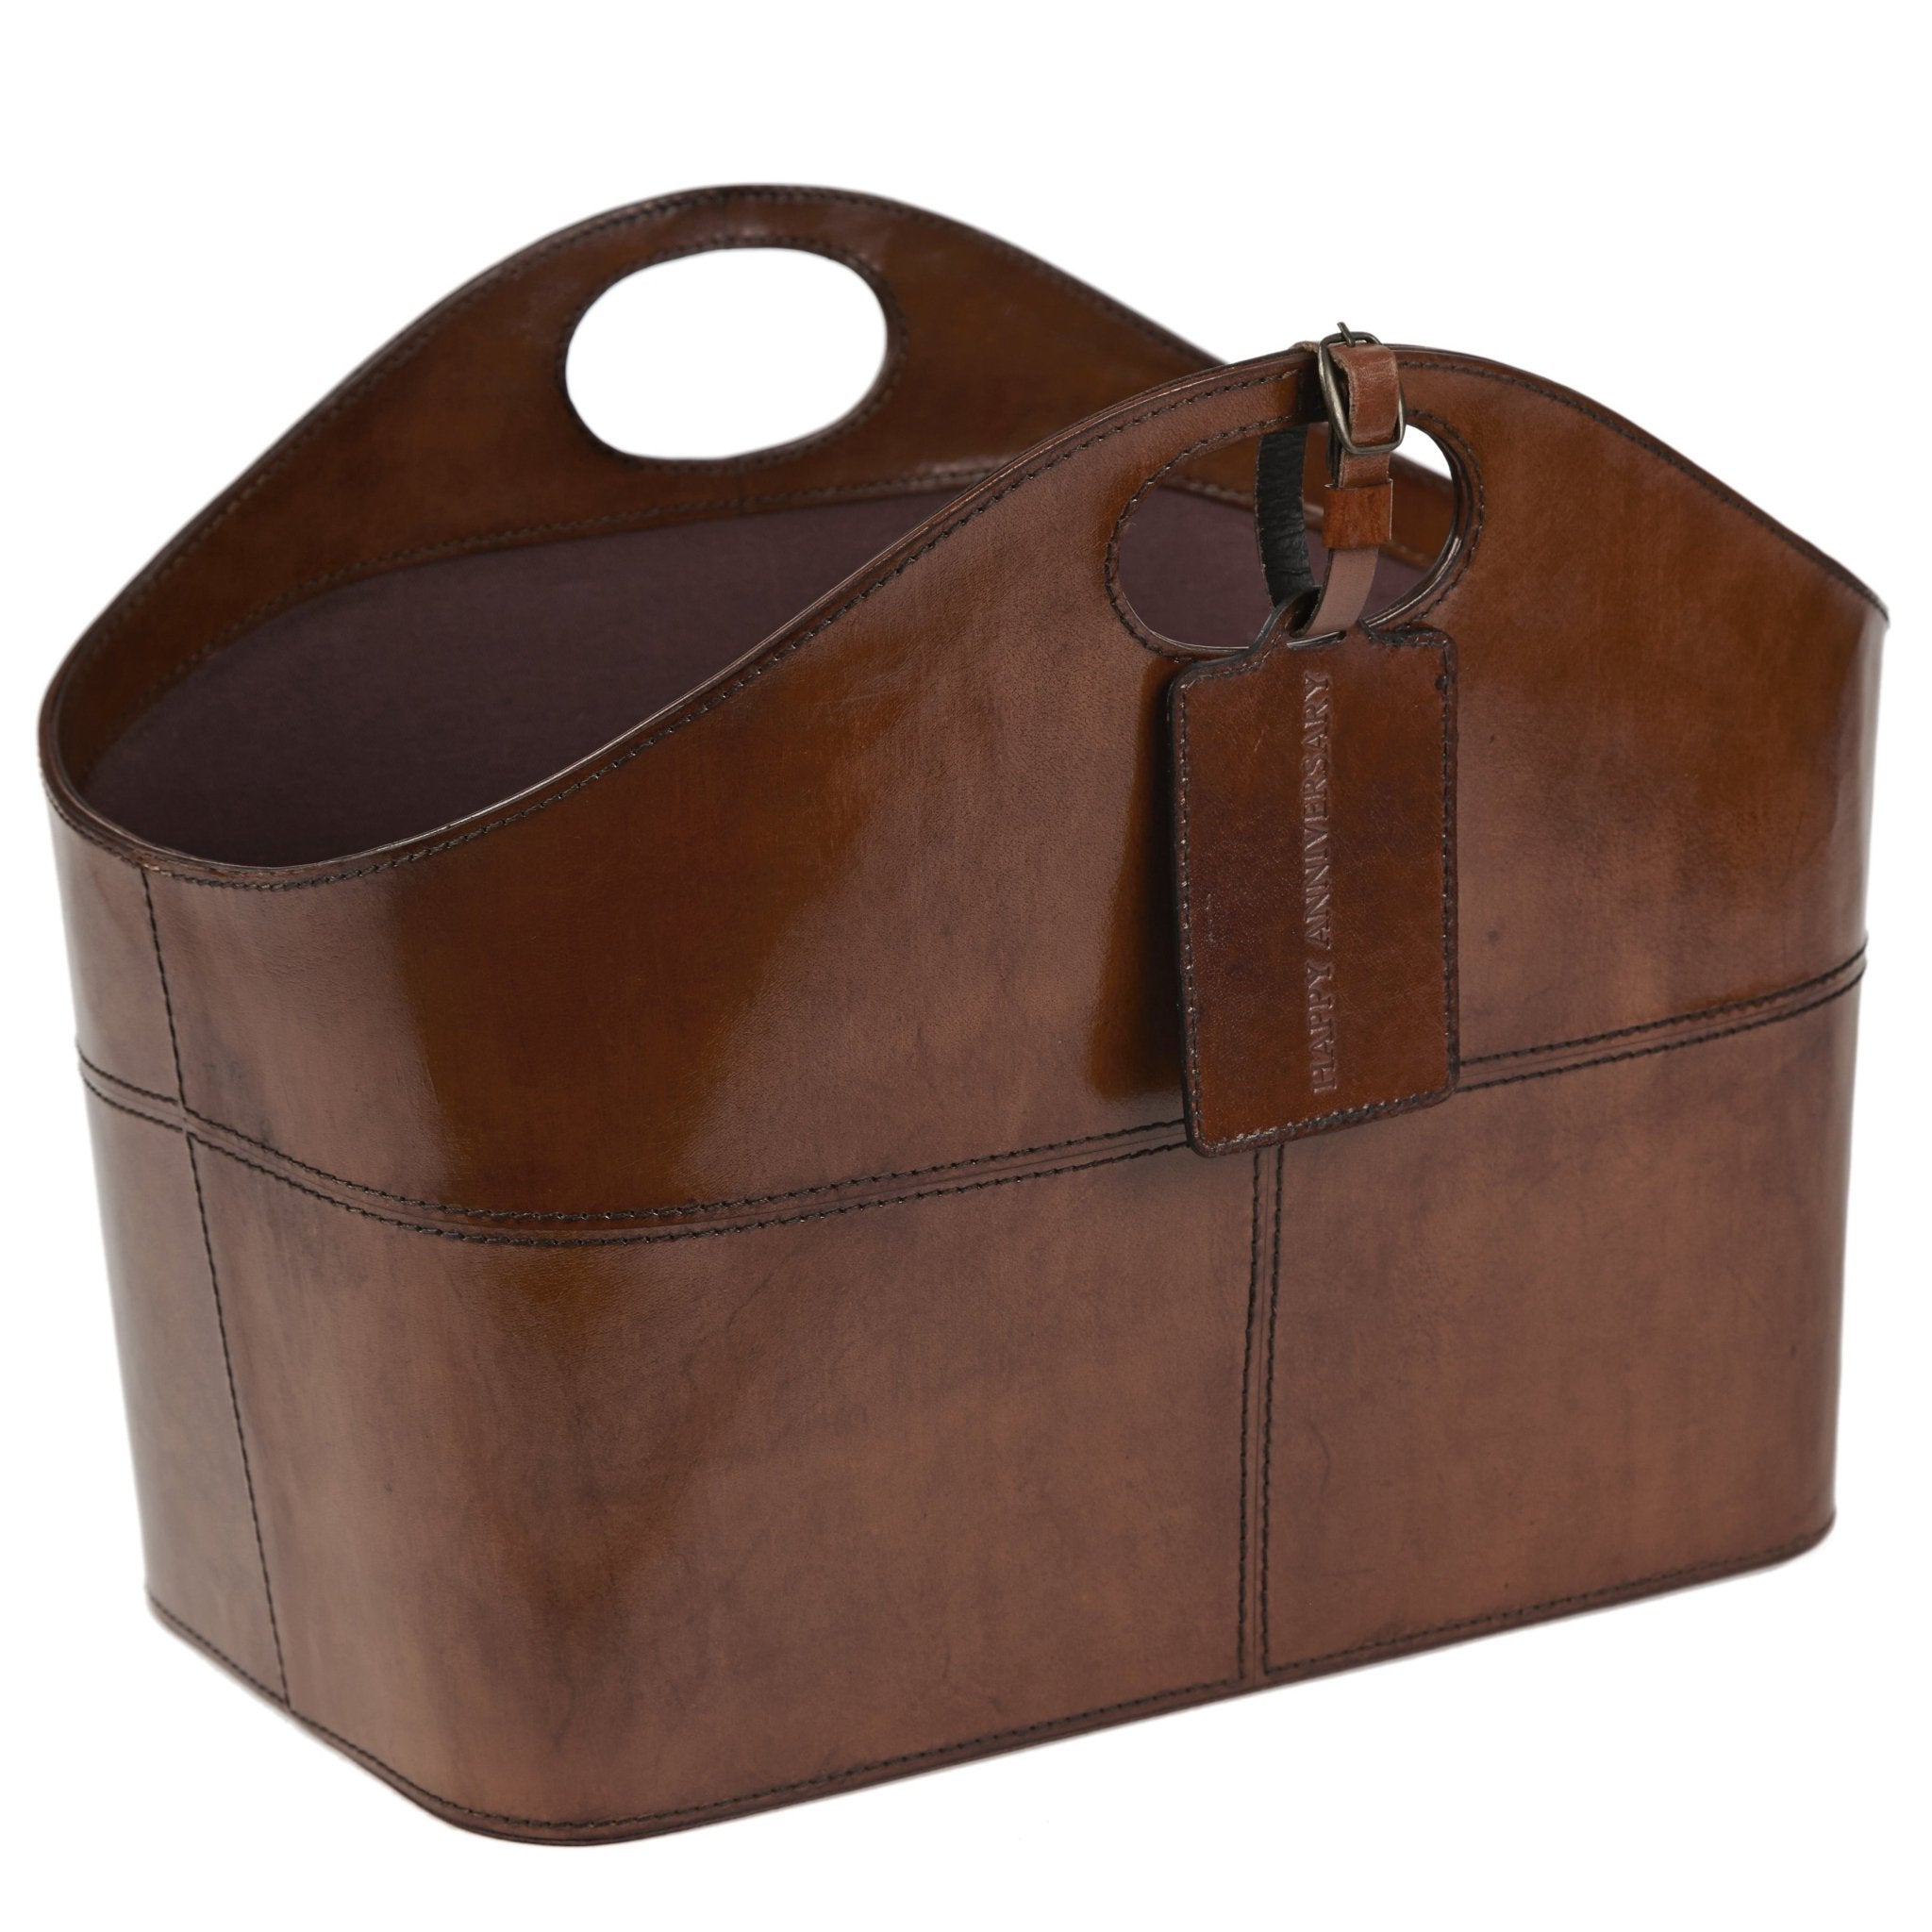 Leather Curved Storage Basket - Life of Riley